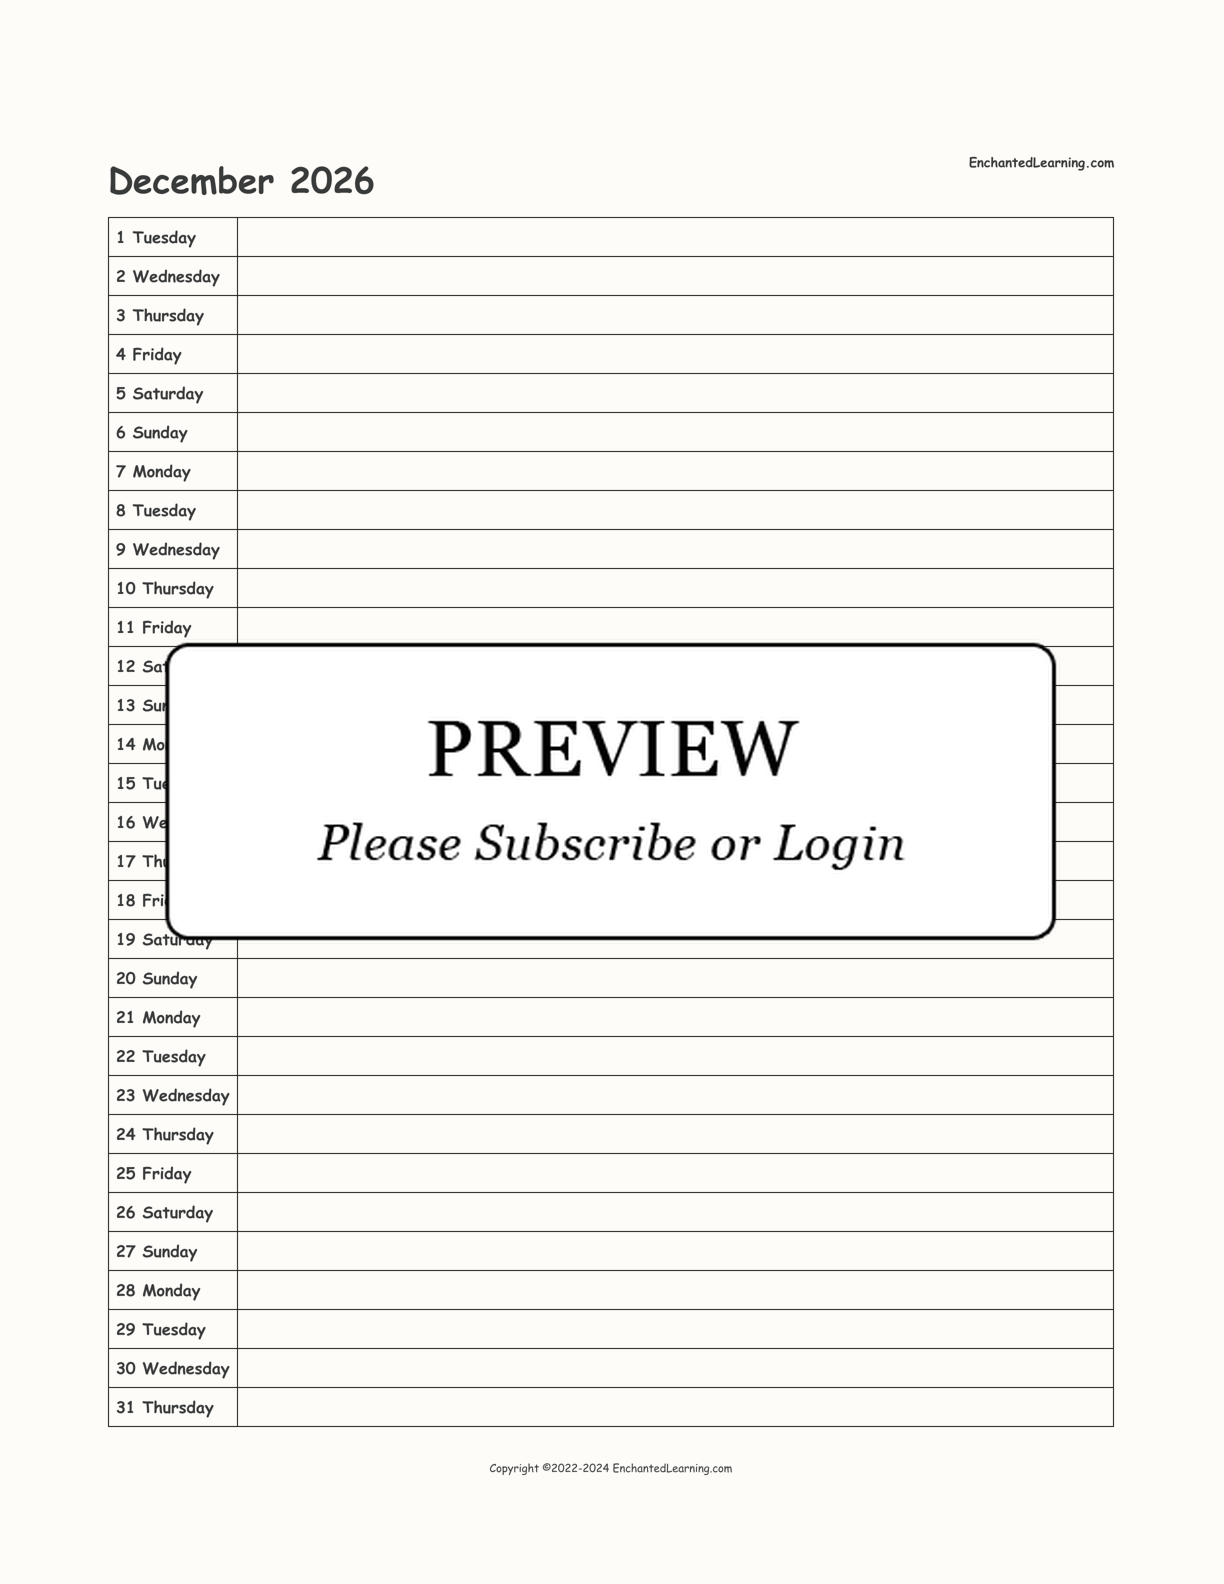 2026 Scheduling Calendar interactive printout page 12